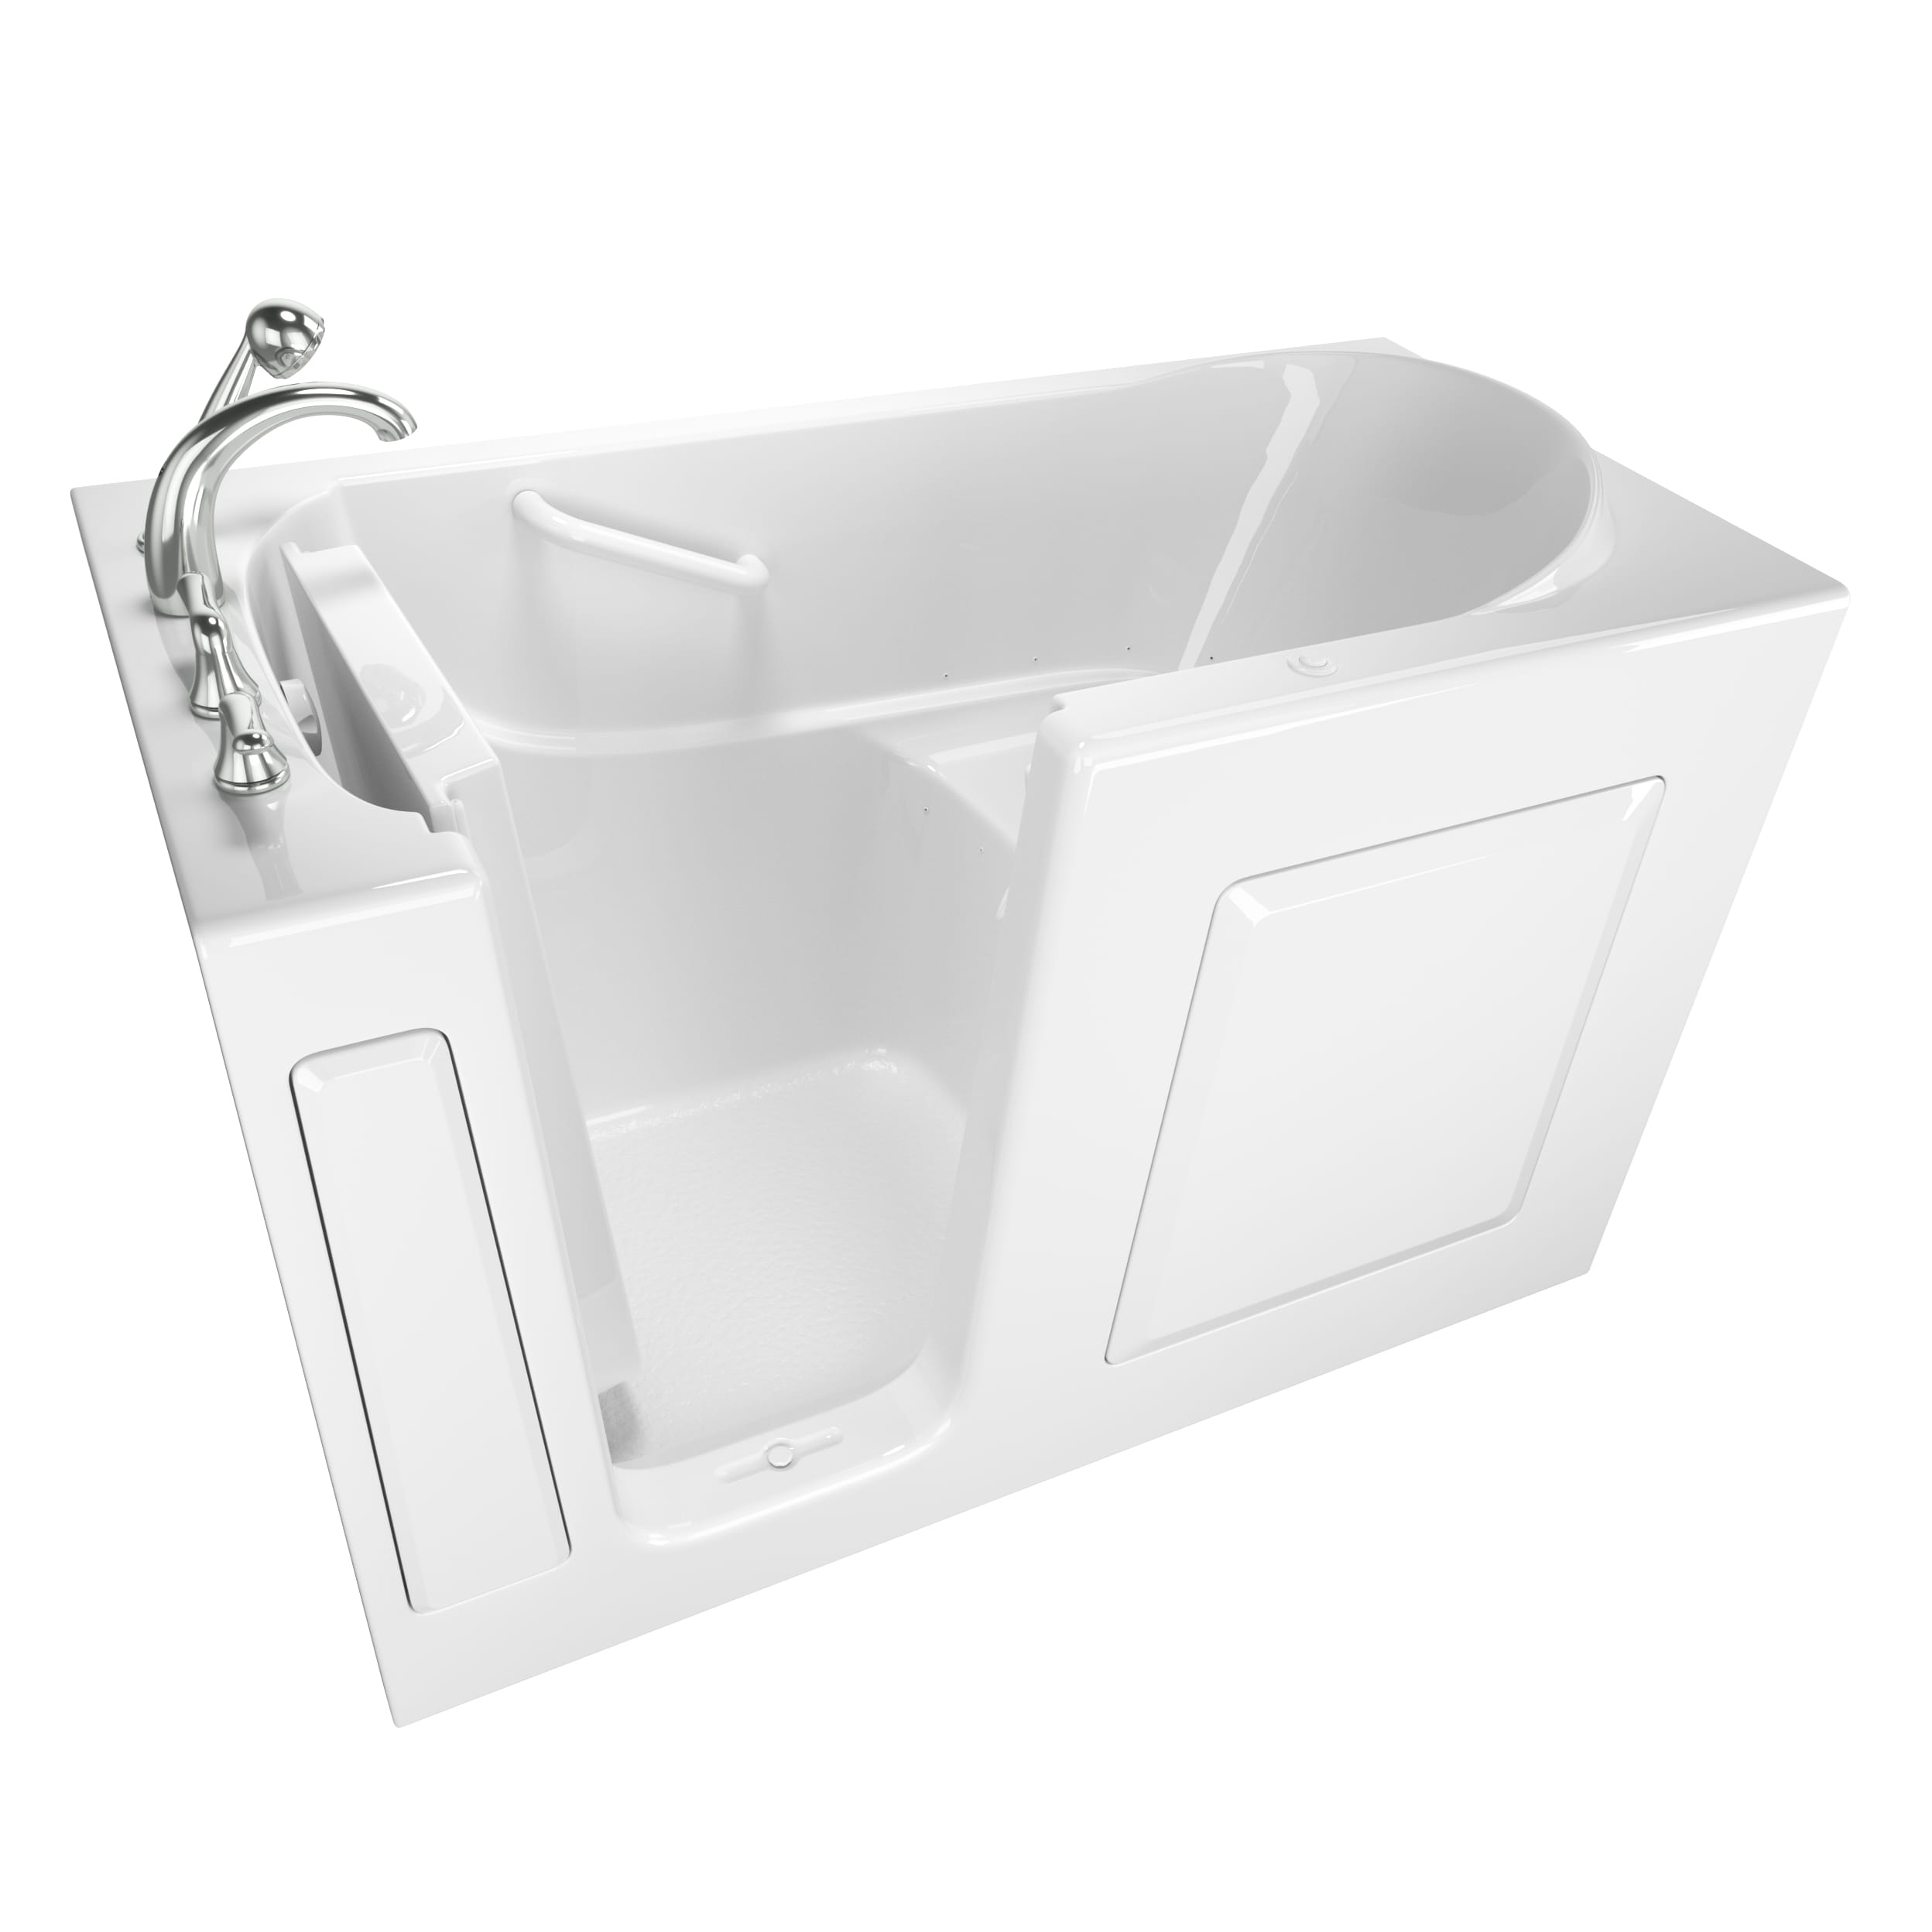 Gelcoat Entry Series 60 x 30 Inch Walk In Tub With Air Spa System - Left Hand Drain With Faucet WIB WHITE